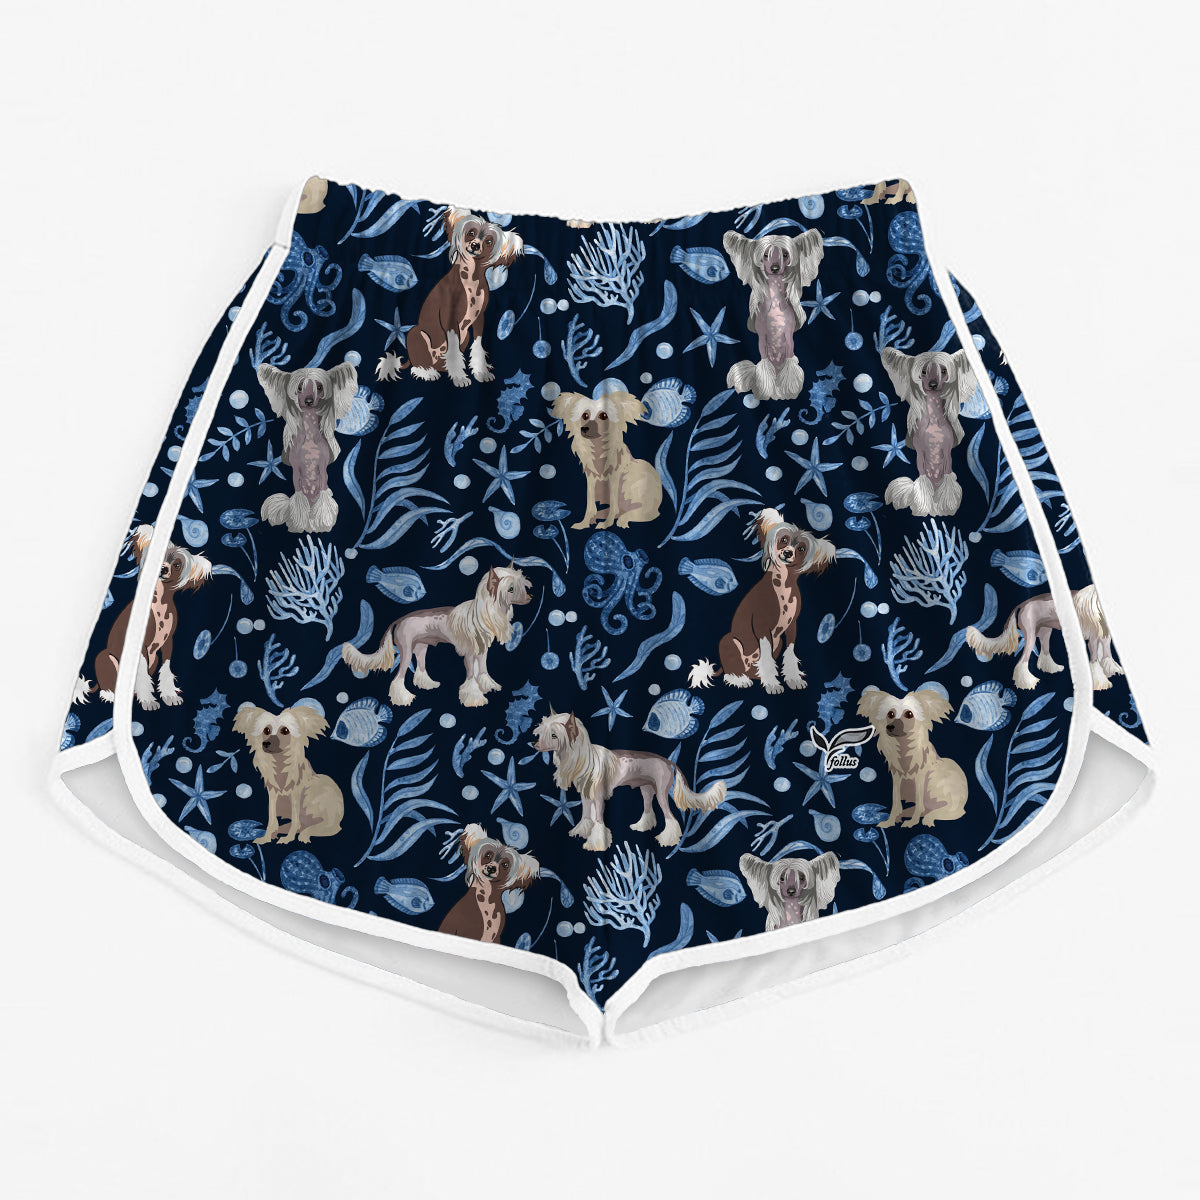 Chinese Crested - Colorful Women's Running Shorts V3